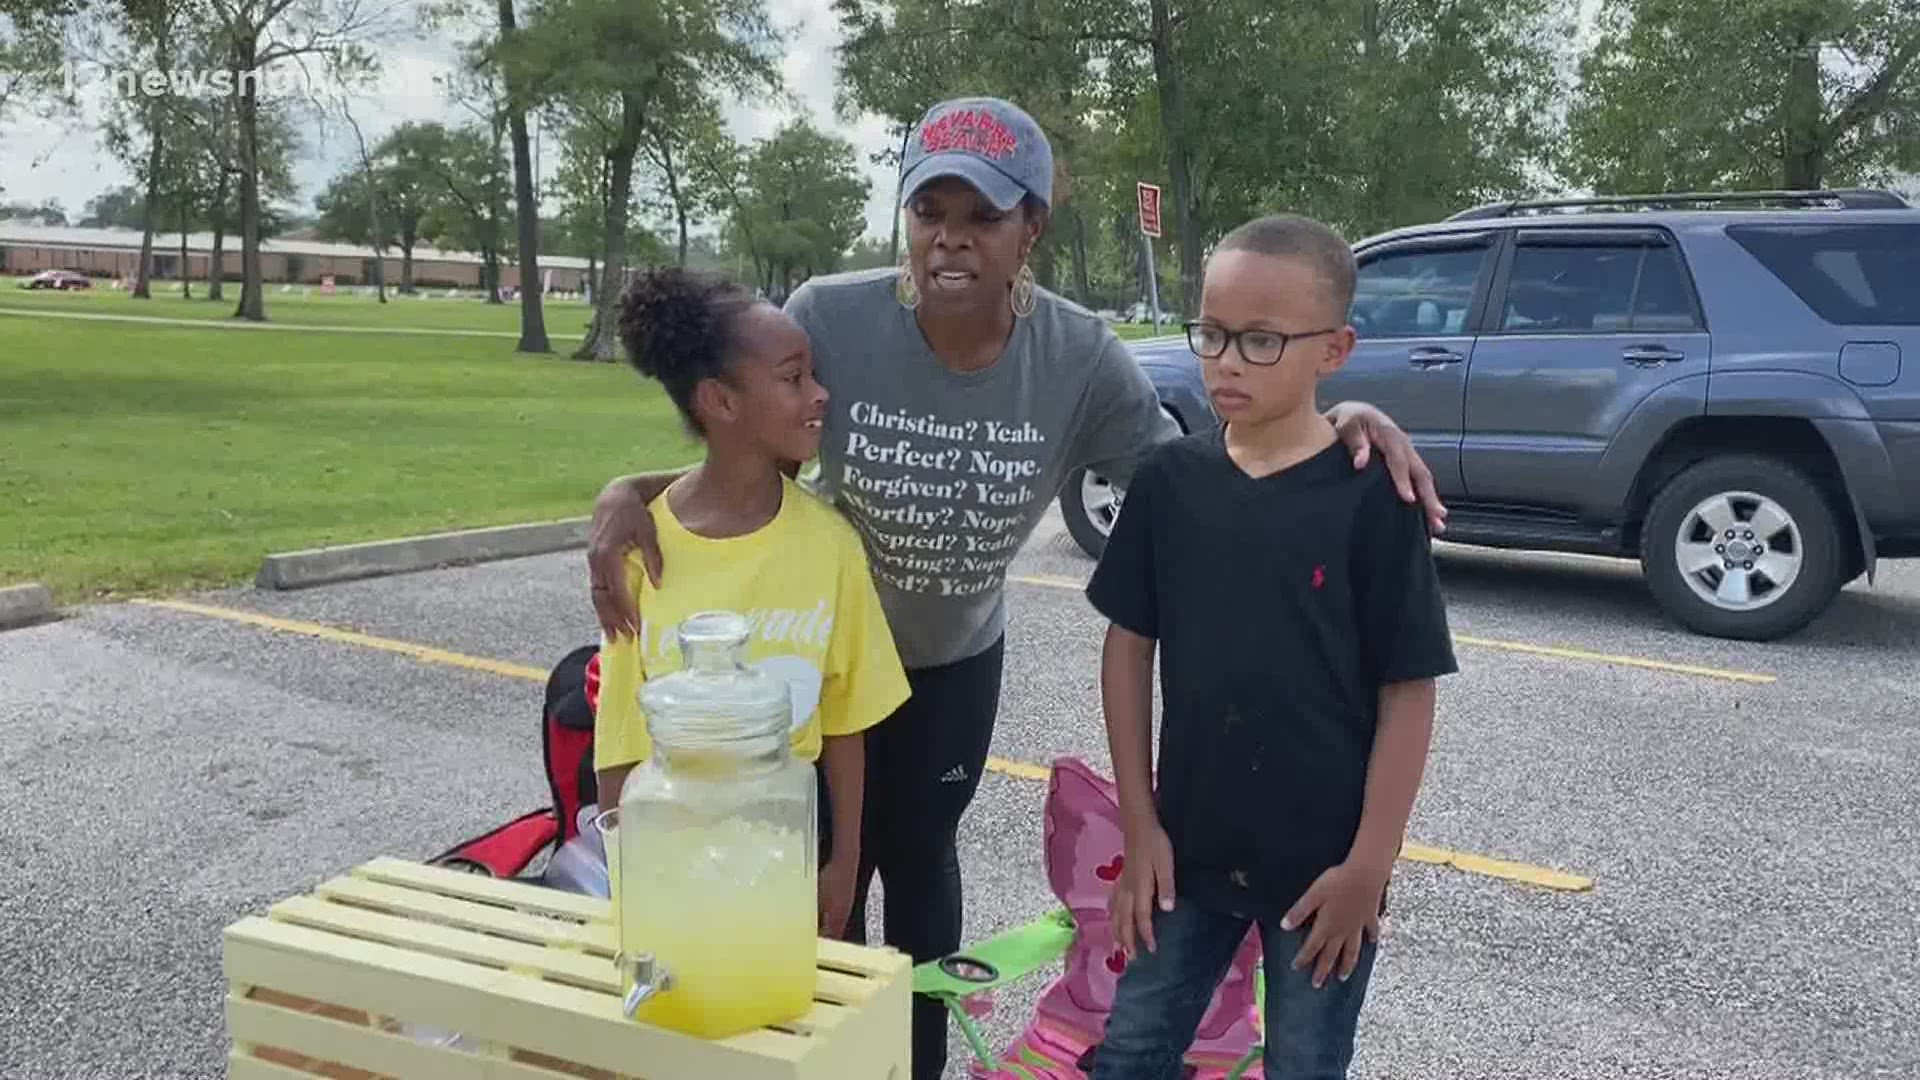 Children across Jefferson County participated in Lemonade Day Sunday, which teaches them how to start and operate their own business, a lemonade stand.